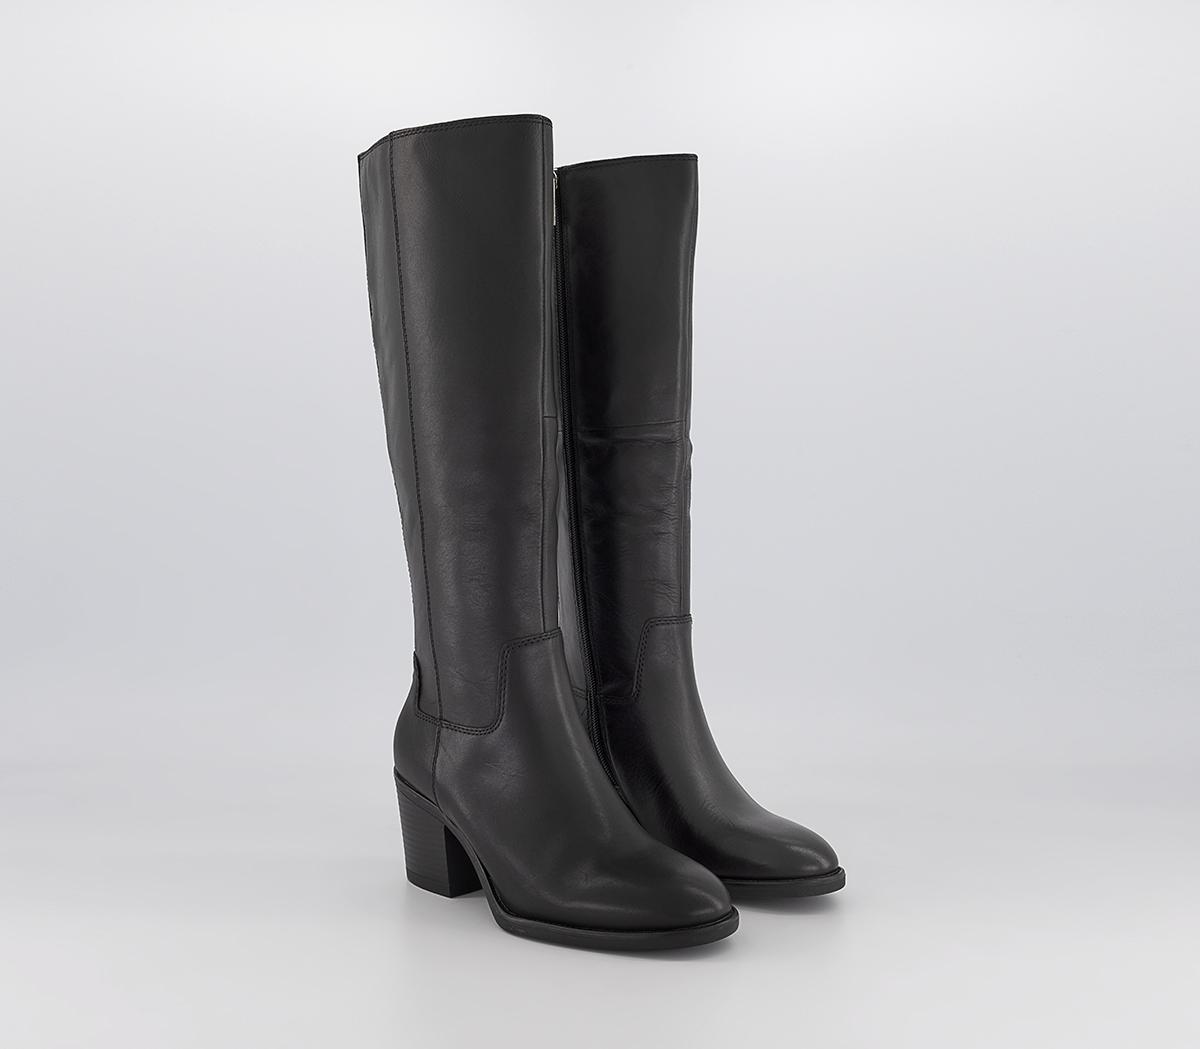 OFFICE Kabana Knee Boots Black Leather - Knee High Boots